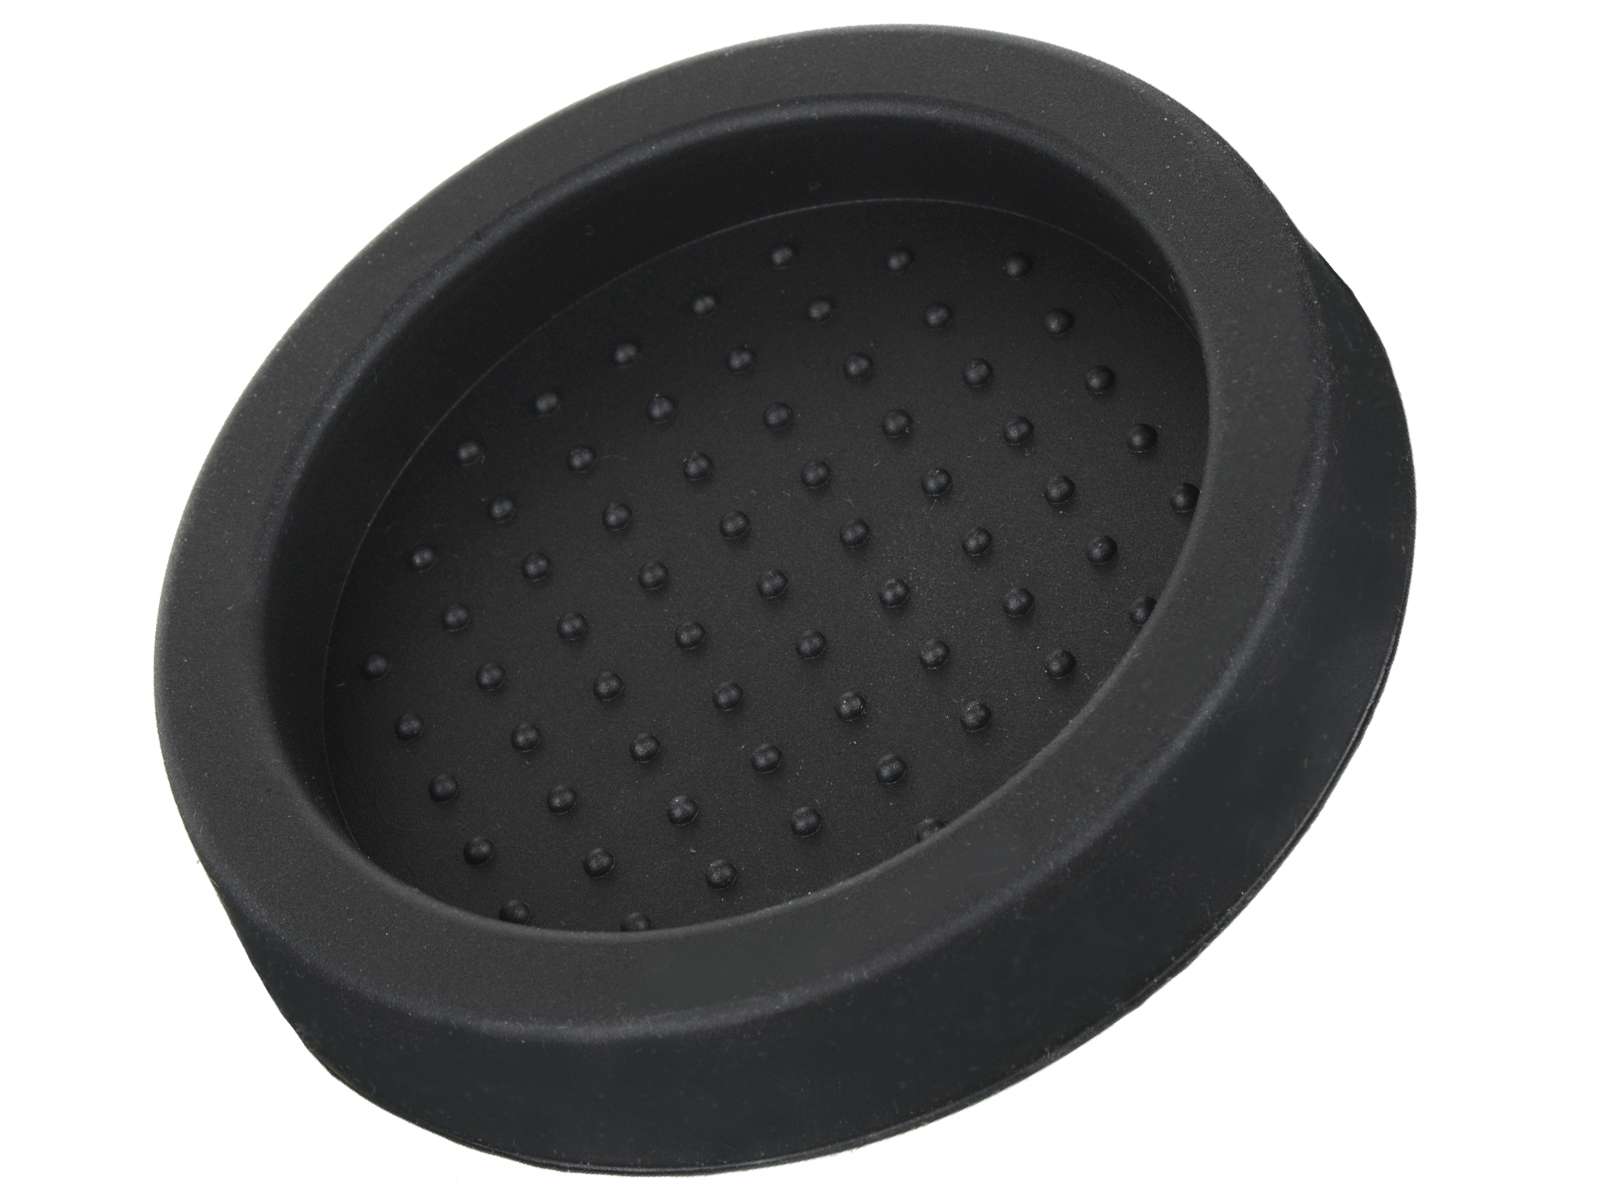 Scarlet espresso tamper tray puck mat made of food-safe silicone for storing the tamper after tamping blue